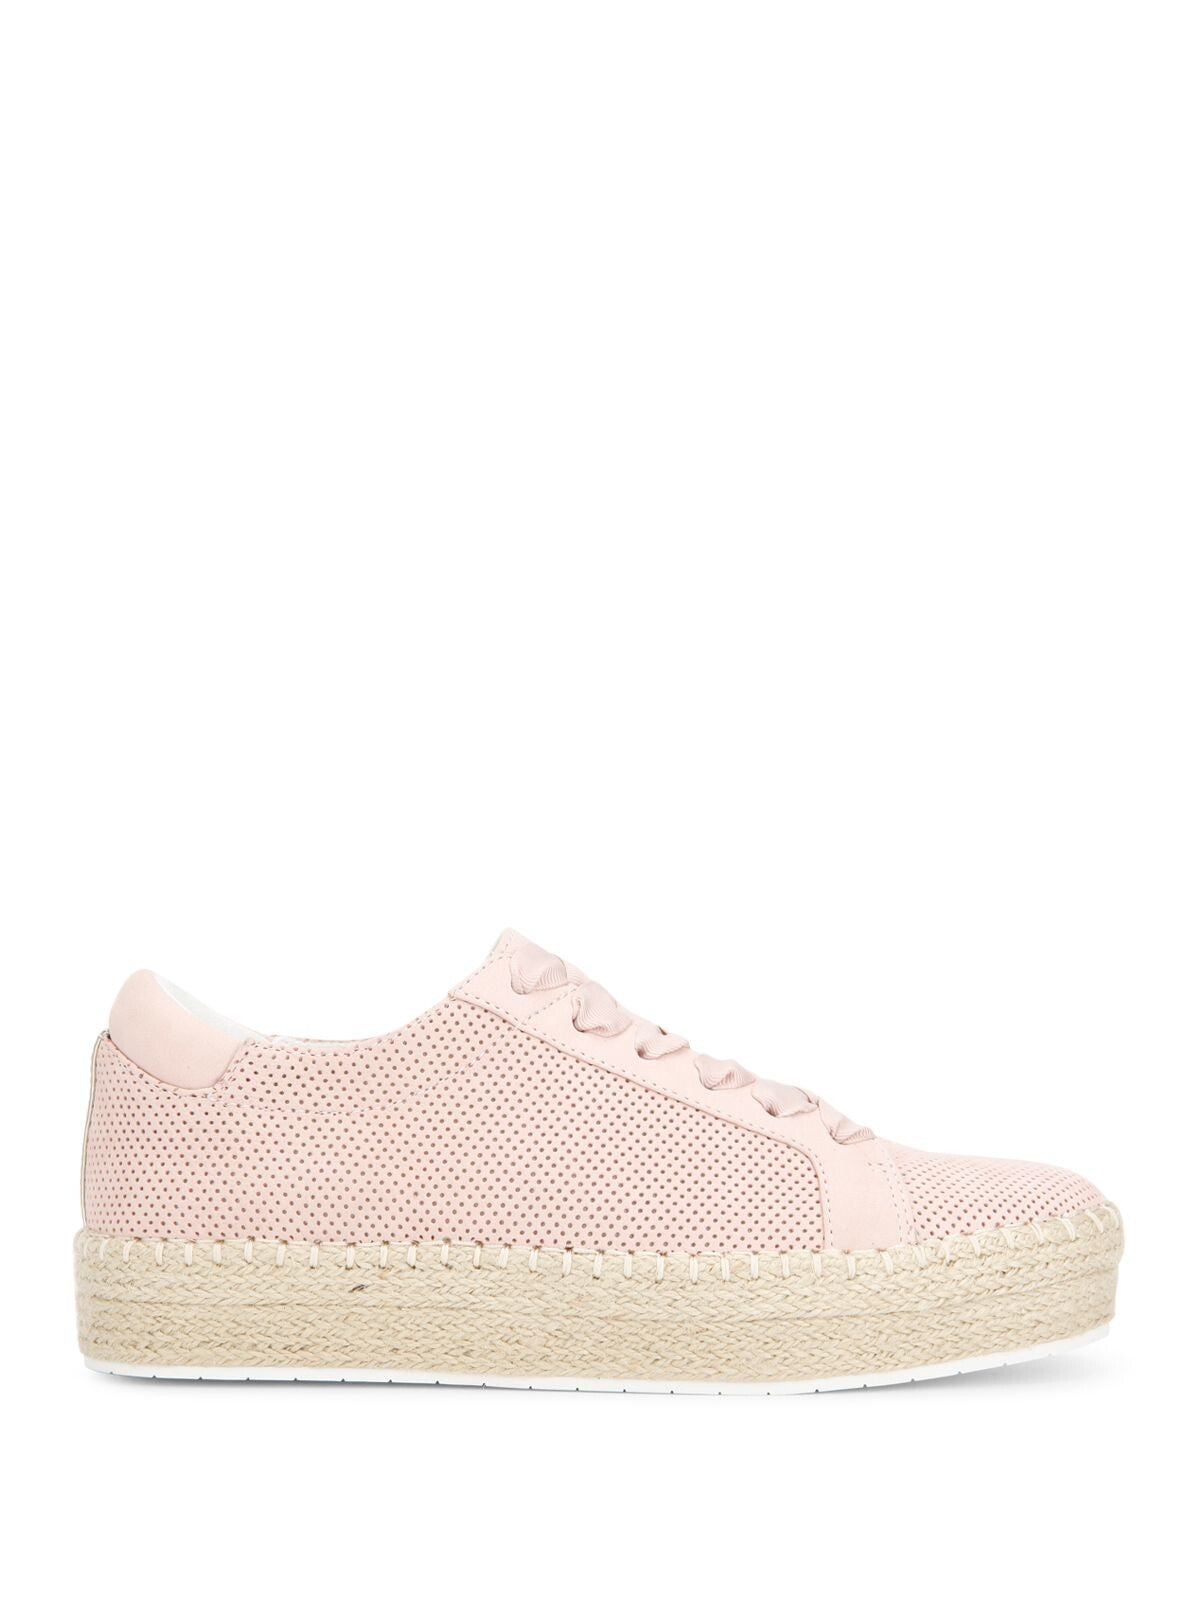 KENNETH COLE Womens Pink Perforated Espadrille Wrap Cushioned Kamspadrille Round Toe Platform Lace-Up Leather Athletic Sneakers Shoes 7.5 M